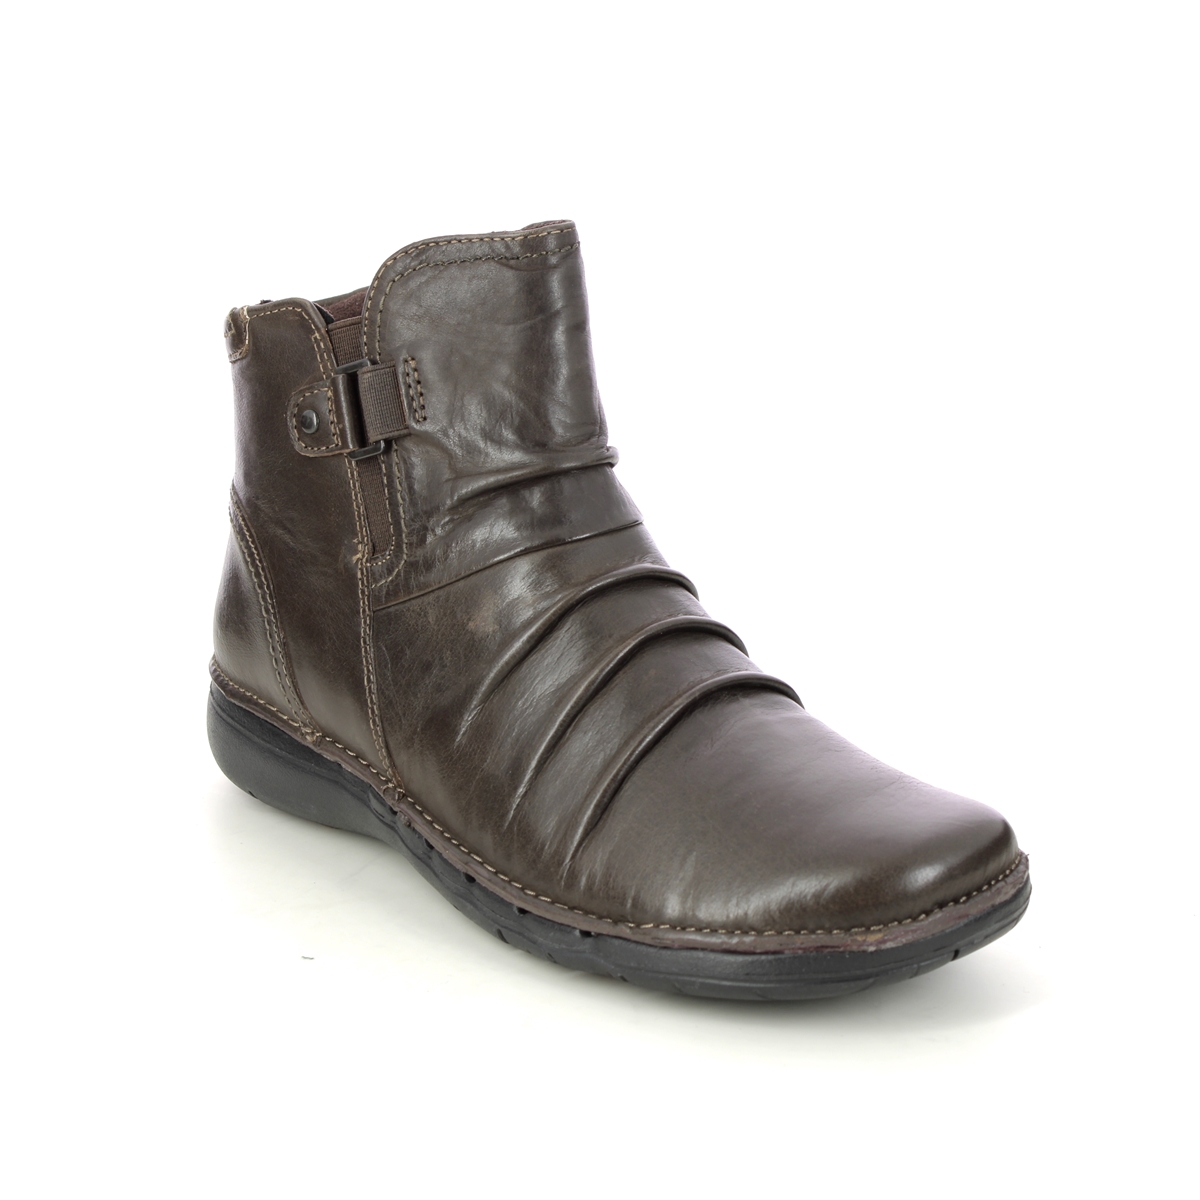 Clarks Un Loop Top Brown Leather Womens Ankle Boots 686624D In Size 5.5 In Plain Brown Leather